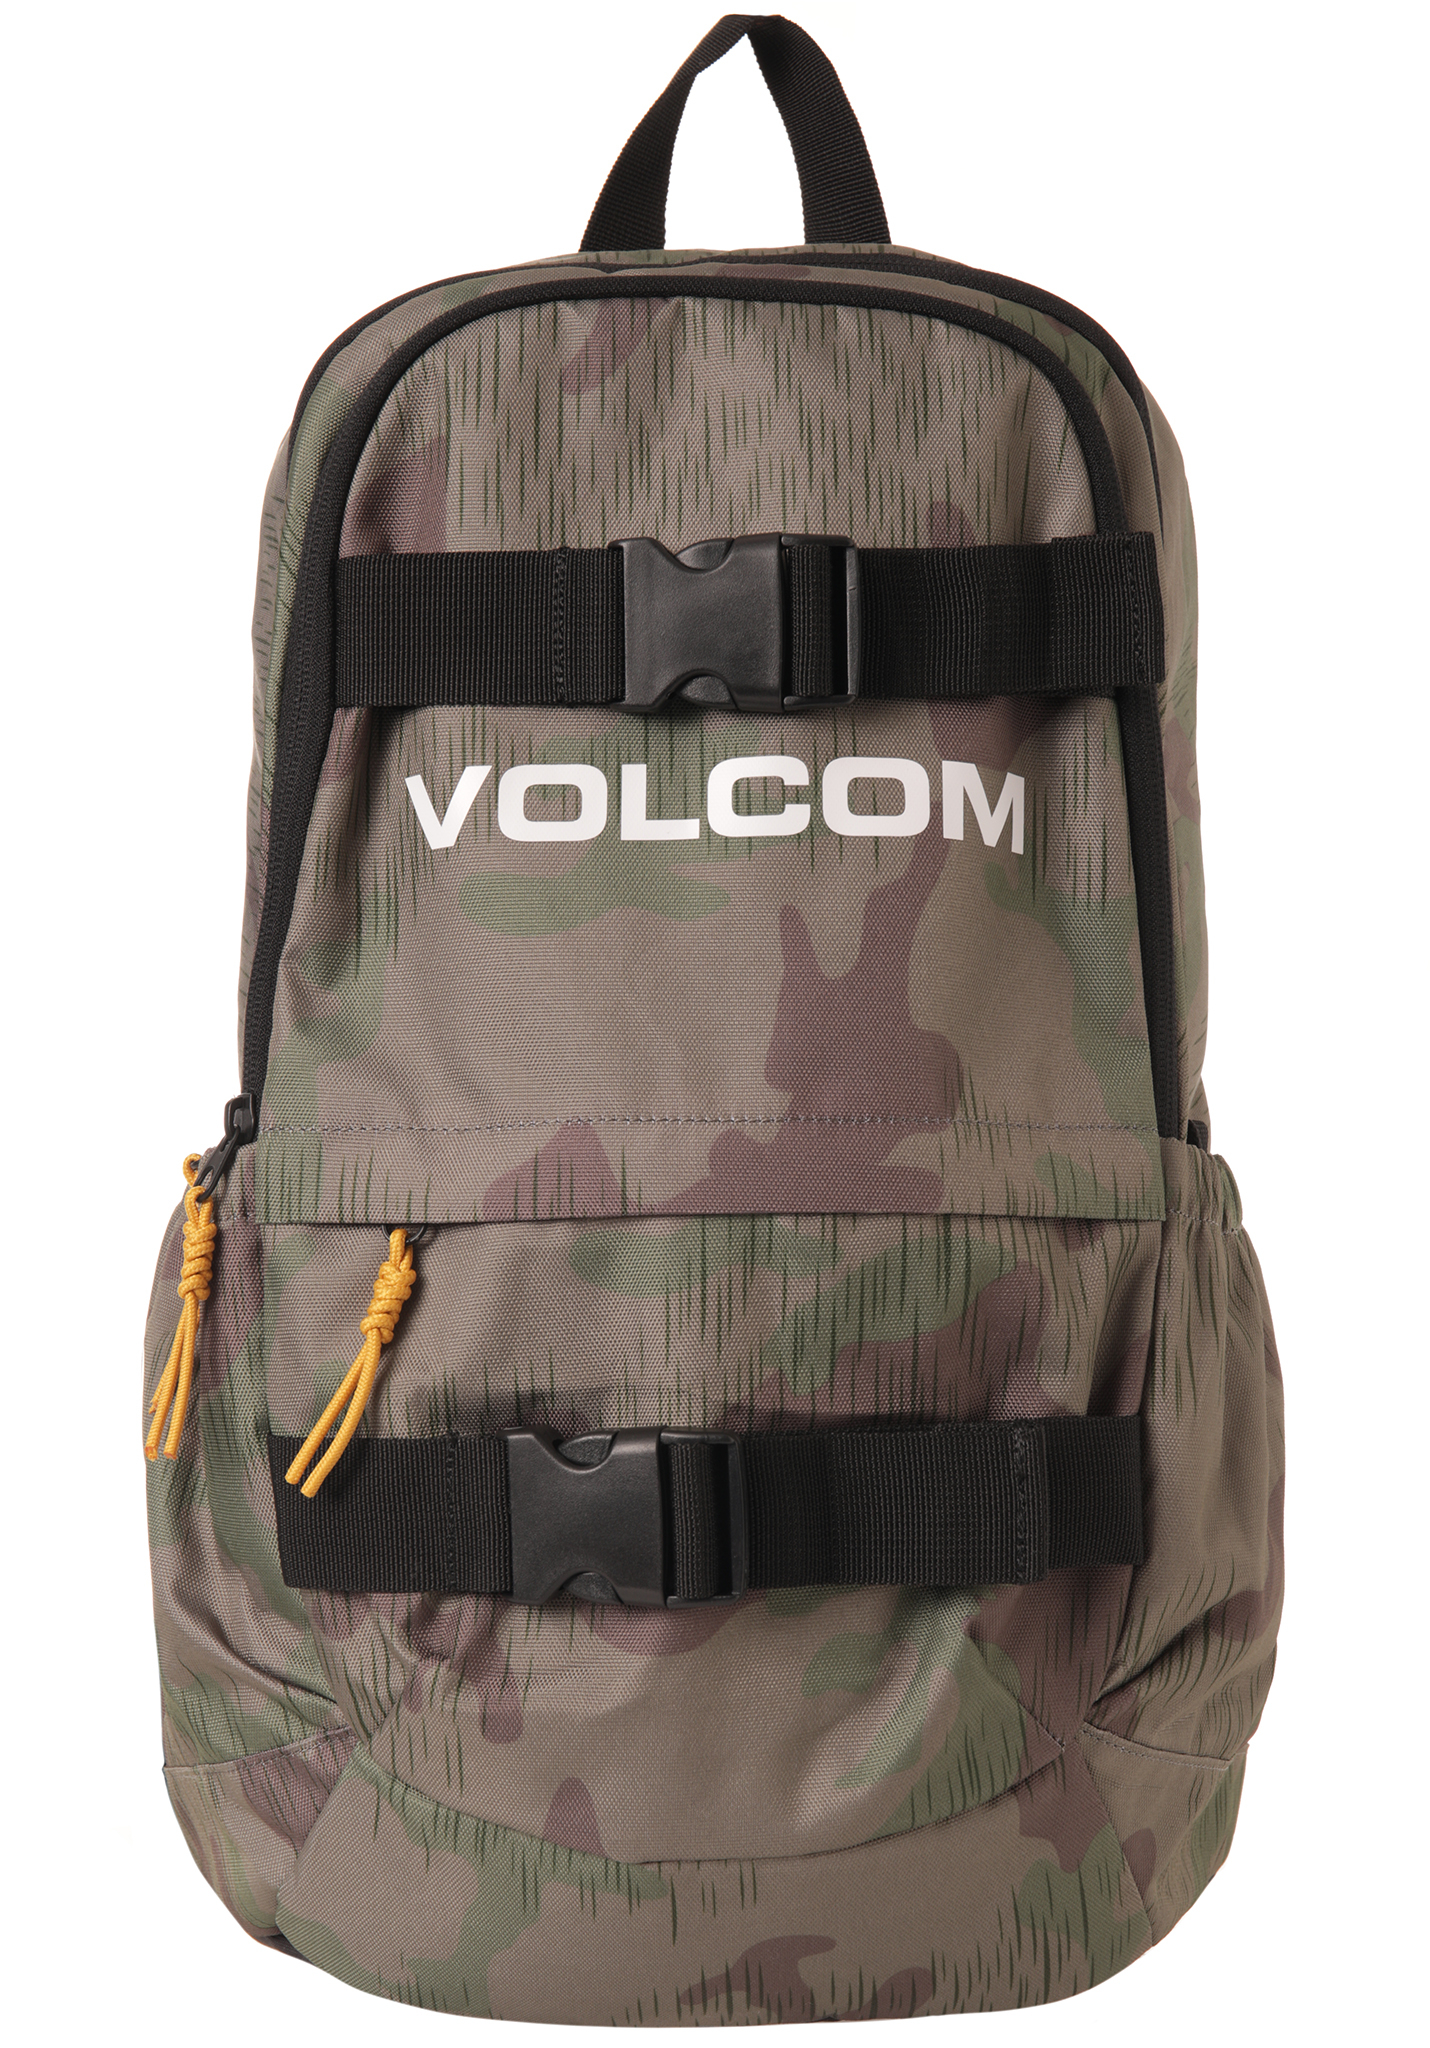 Volcom Substrate II Rucksack camouflage One Size